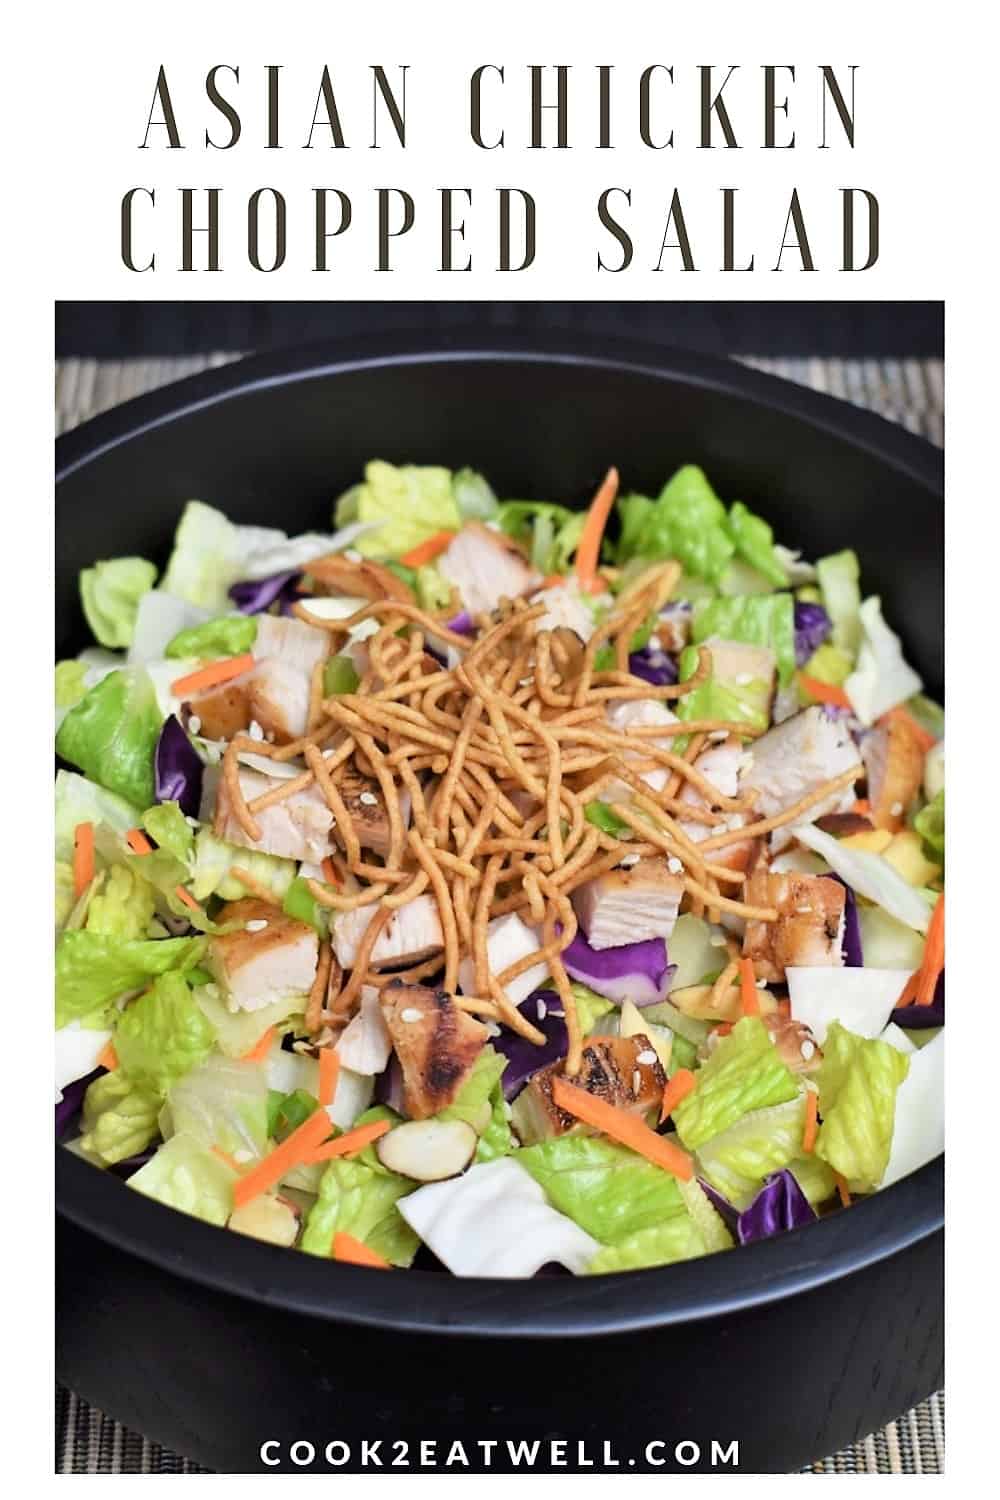 Asian Chopped Salad - Cook2eatwell